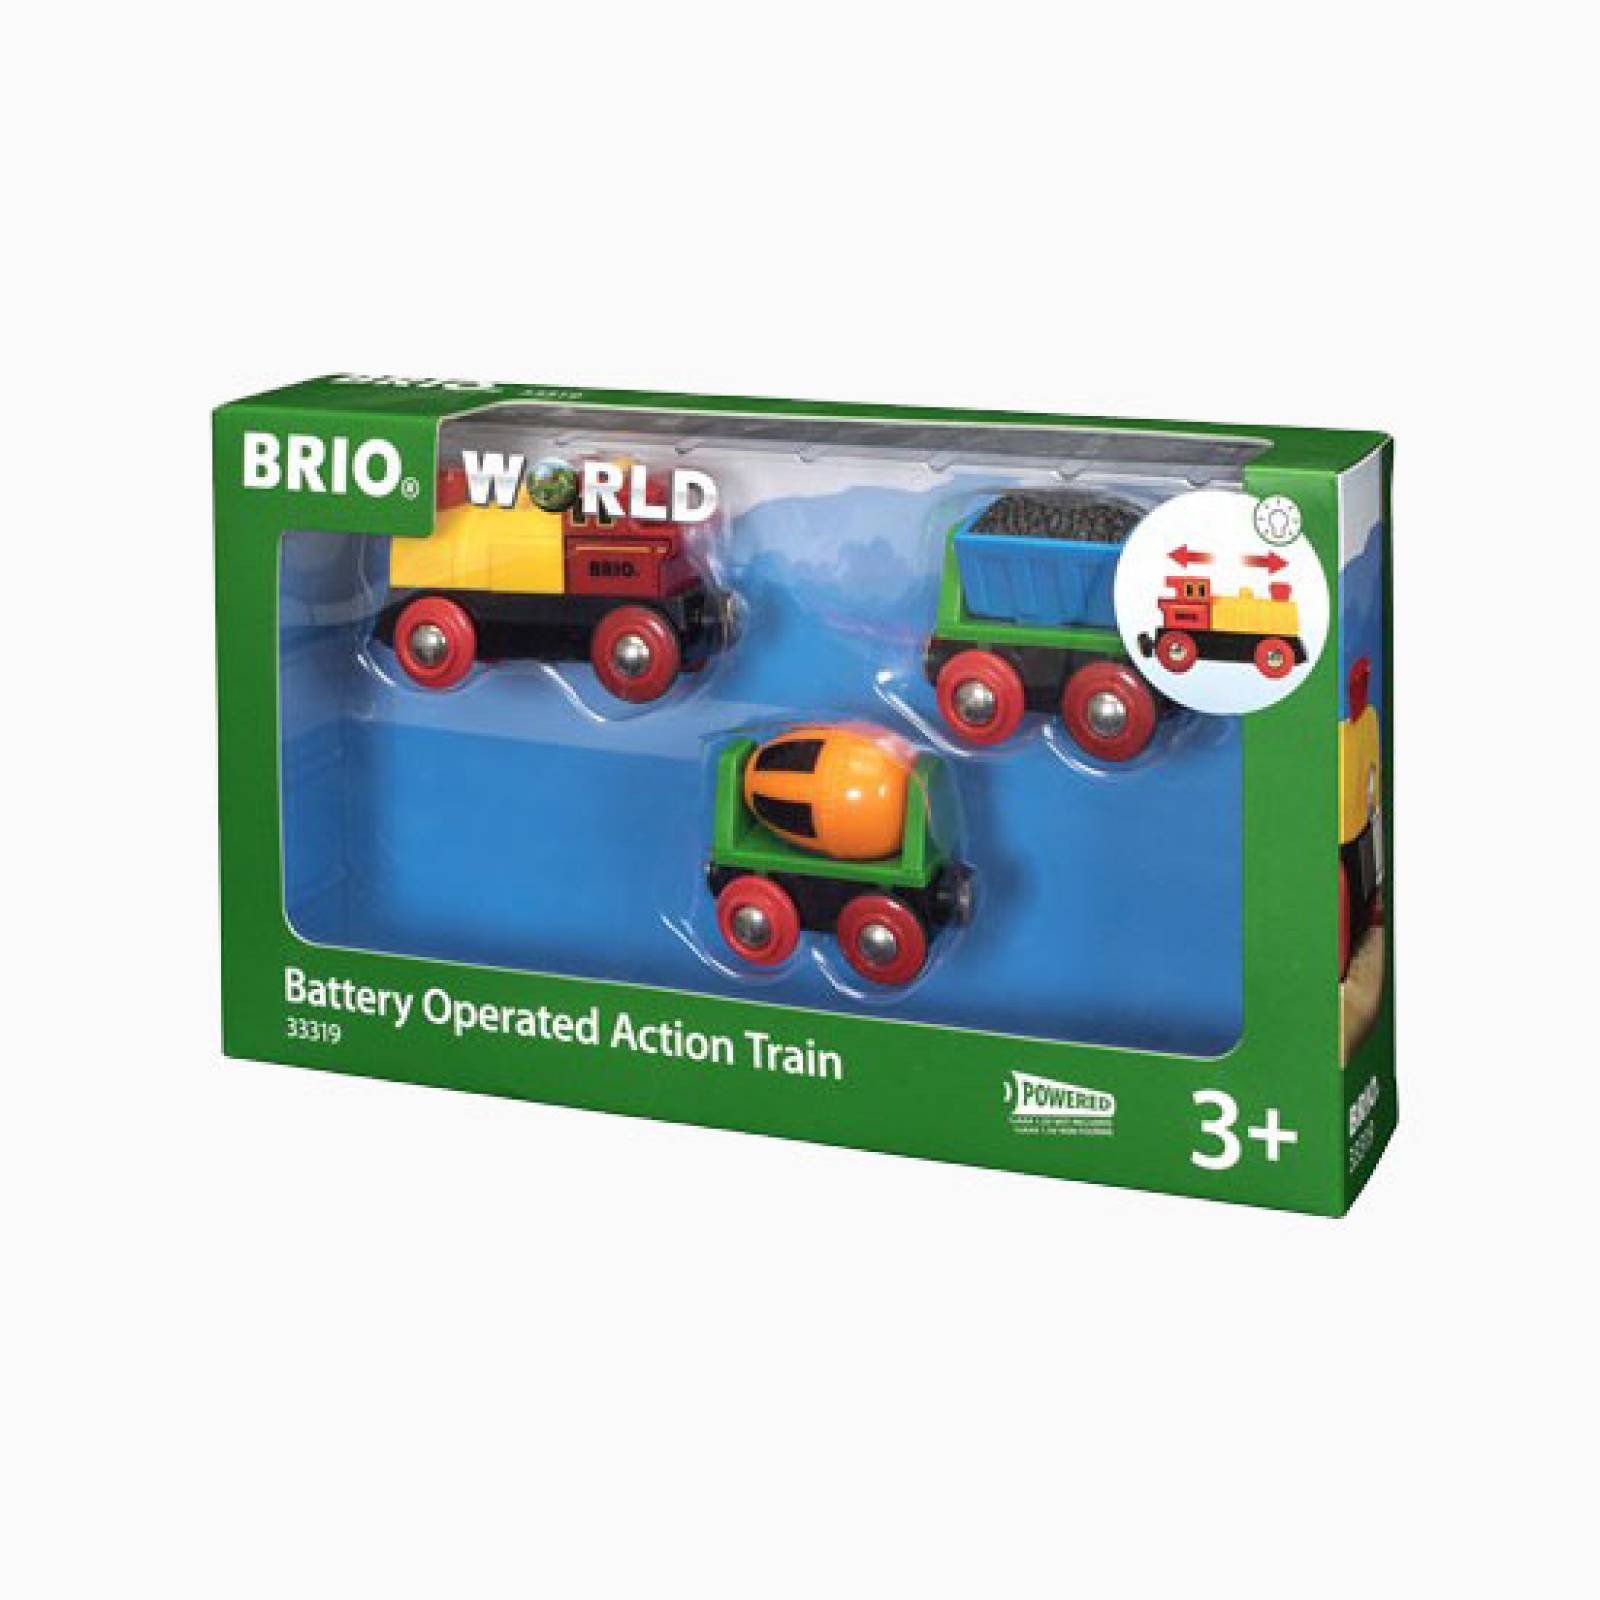 Battery Operated Action Train BRIO Wooden Railway Age 3+ thumbnails